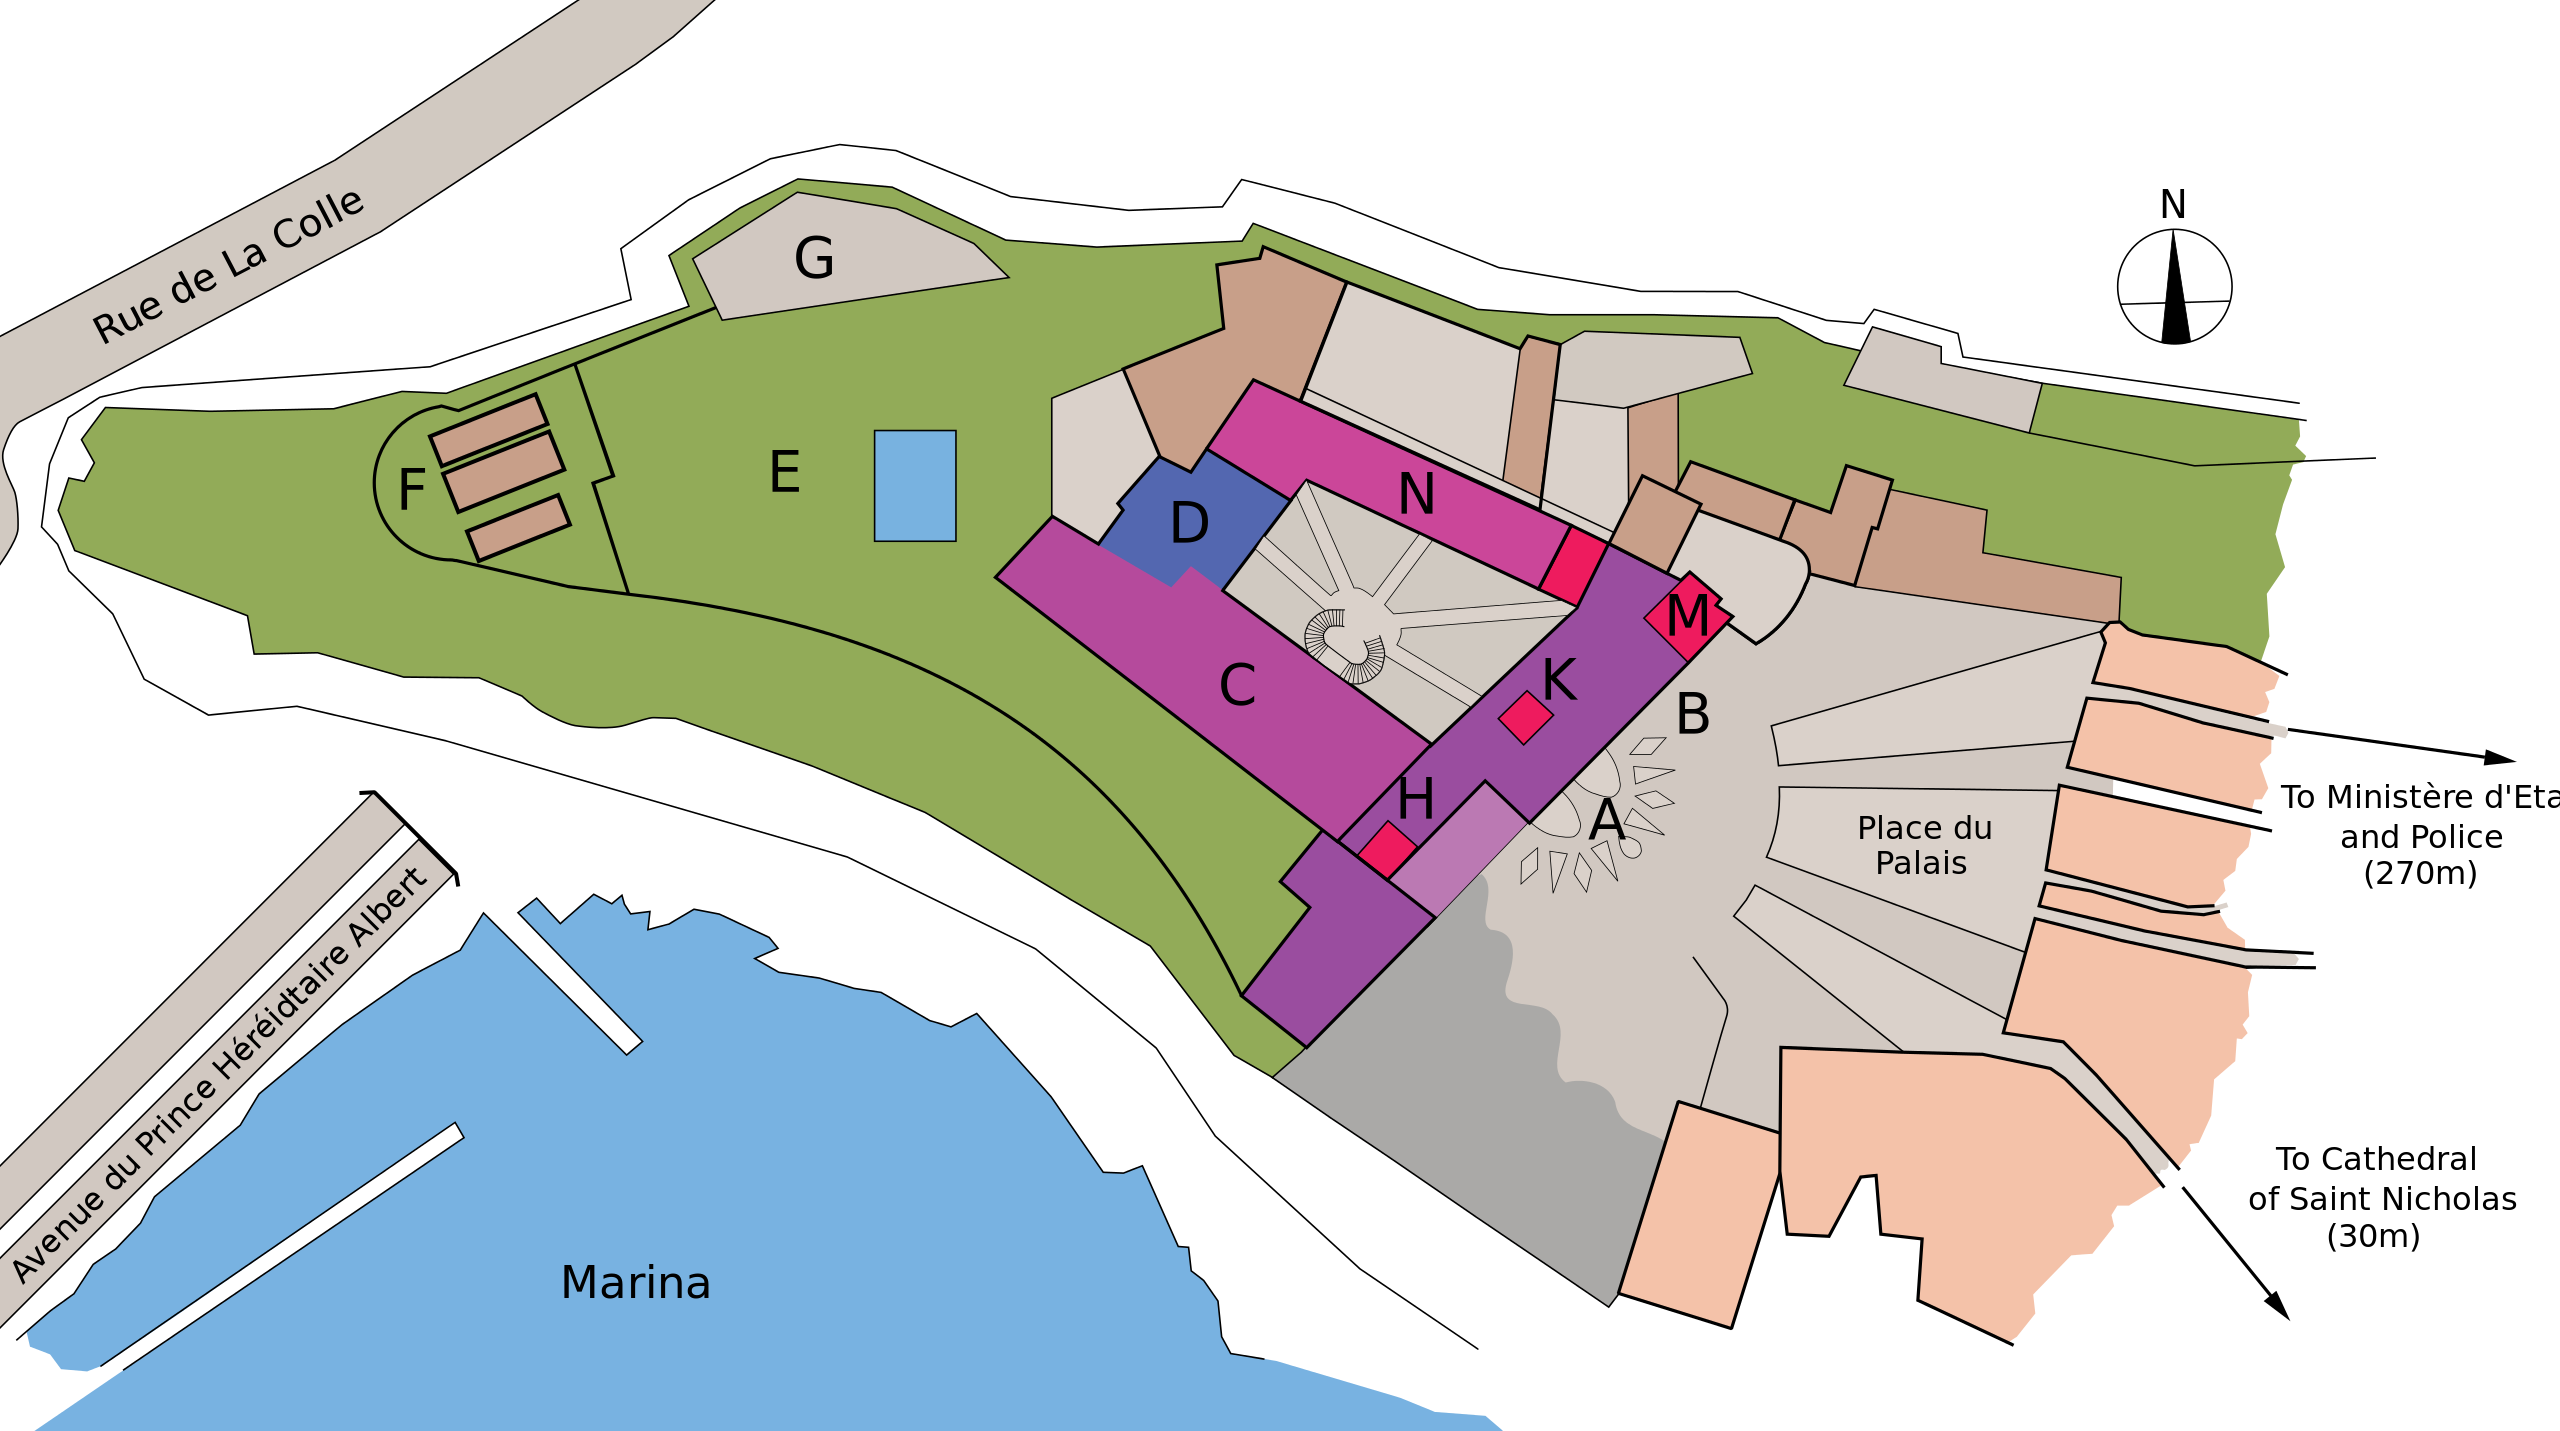 Map of Monaco's Palace by mcginnly (Public Domain)